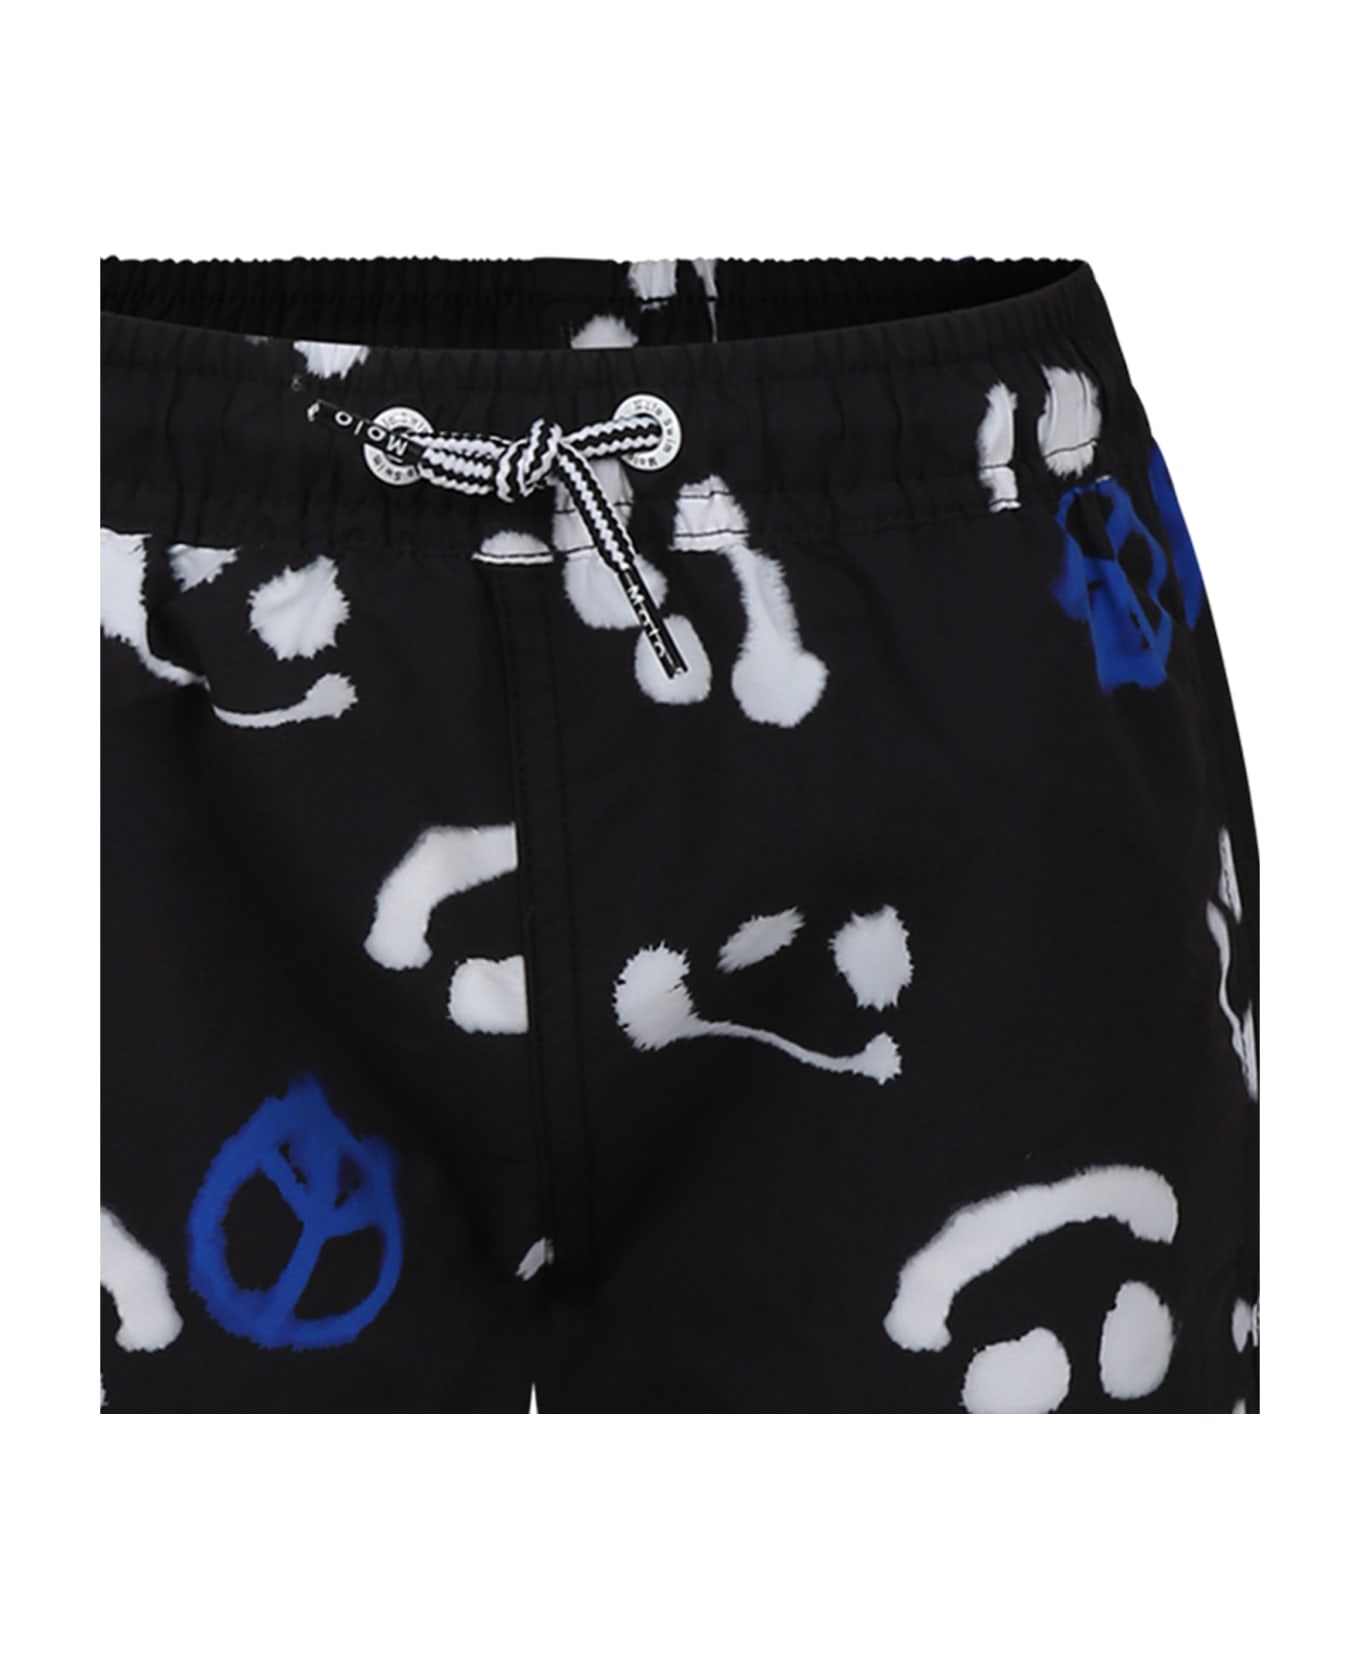 Molo Black Swimsuit For Boy With Smiley - Black 水着